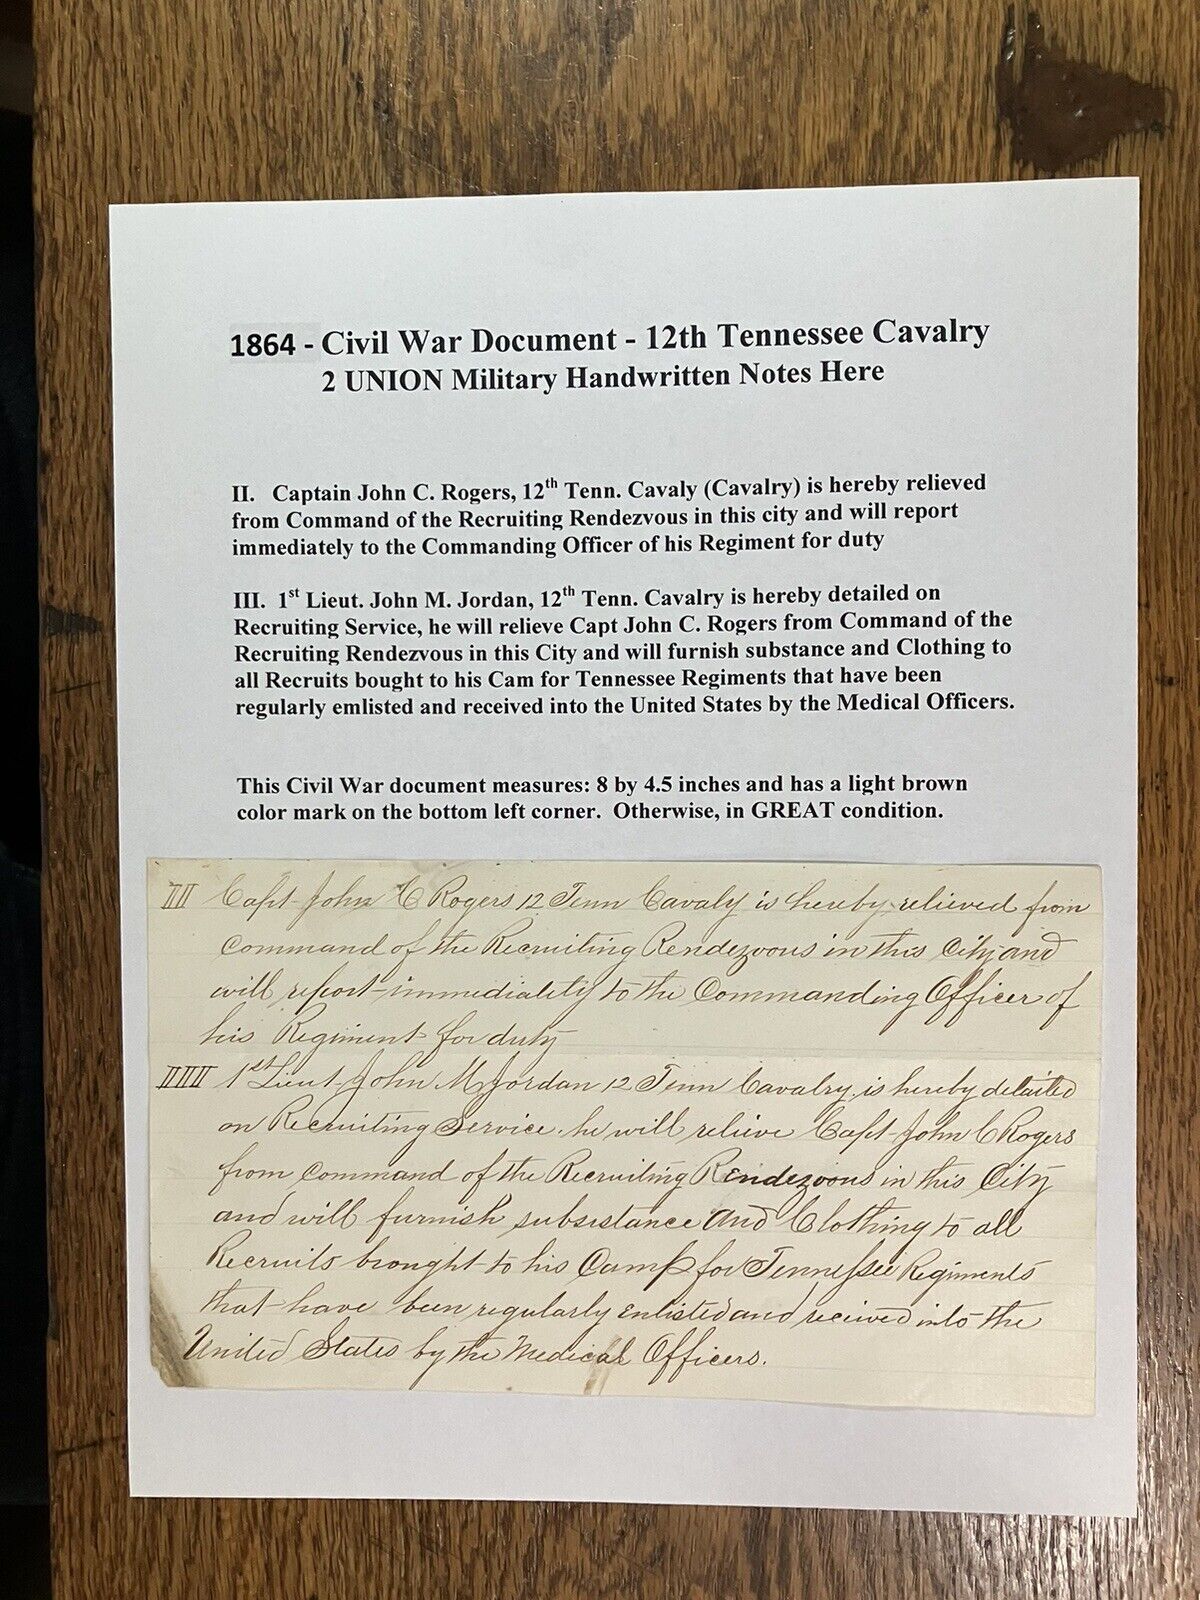 1864 - Civil War Document - 12th Tennessee Cavalry - 2 UNION Military Notes